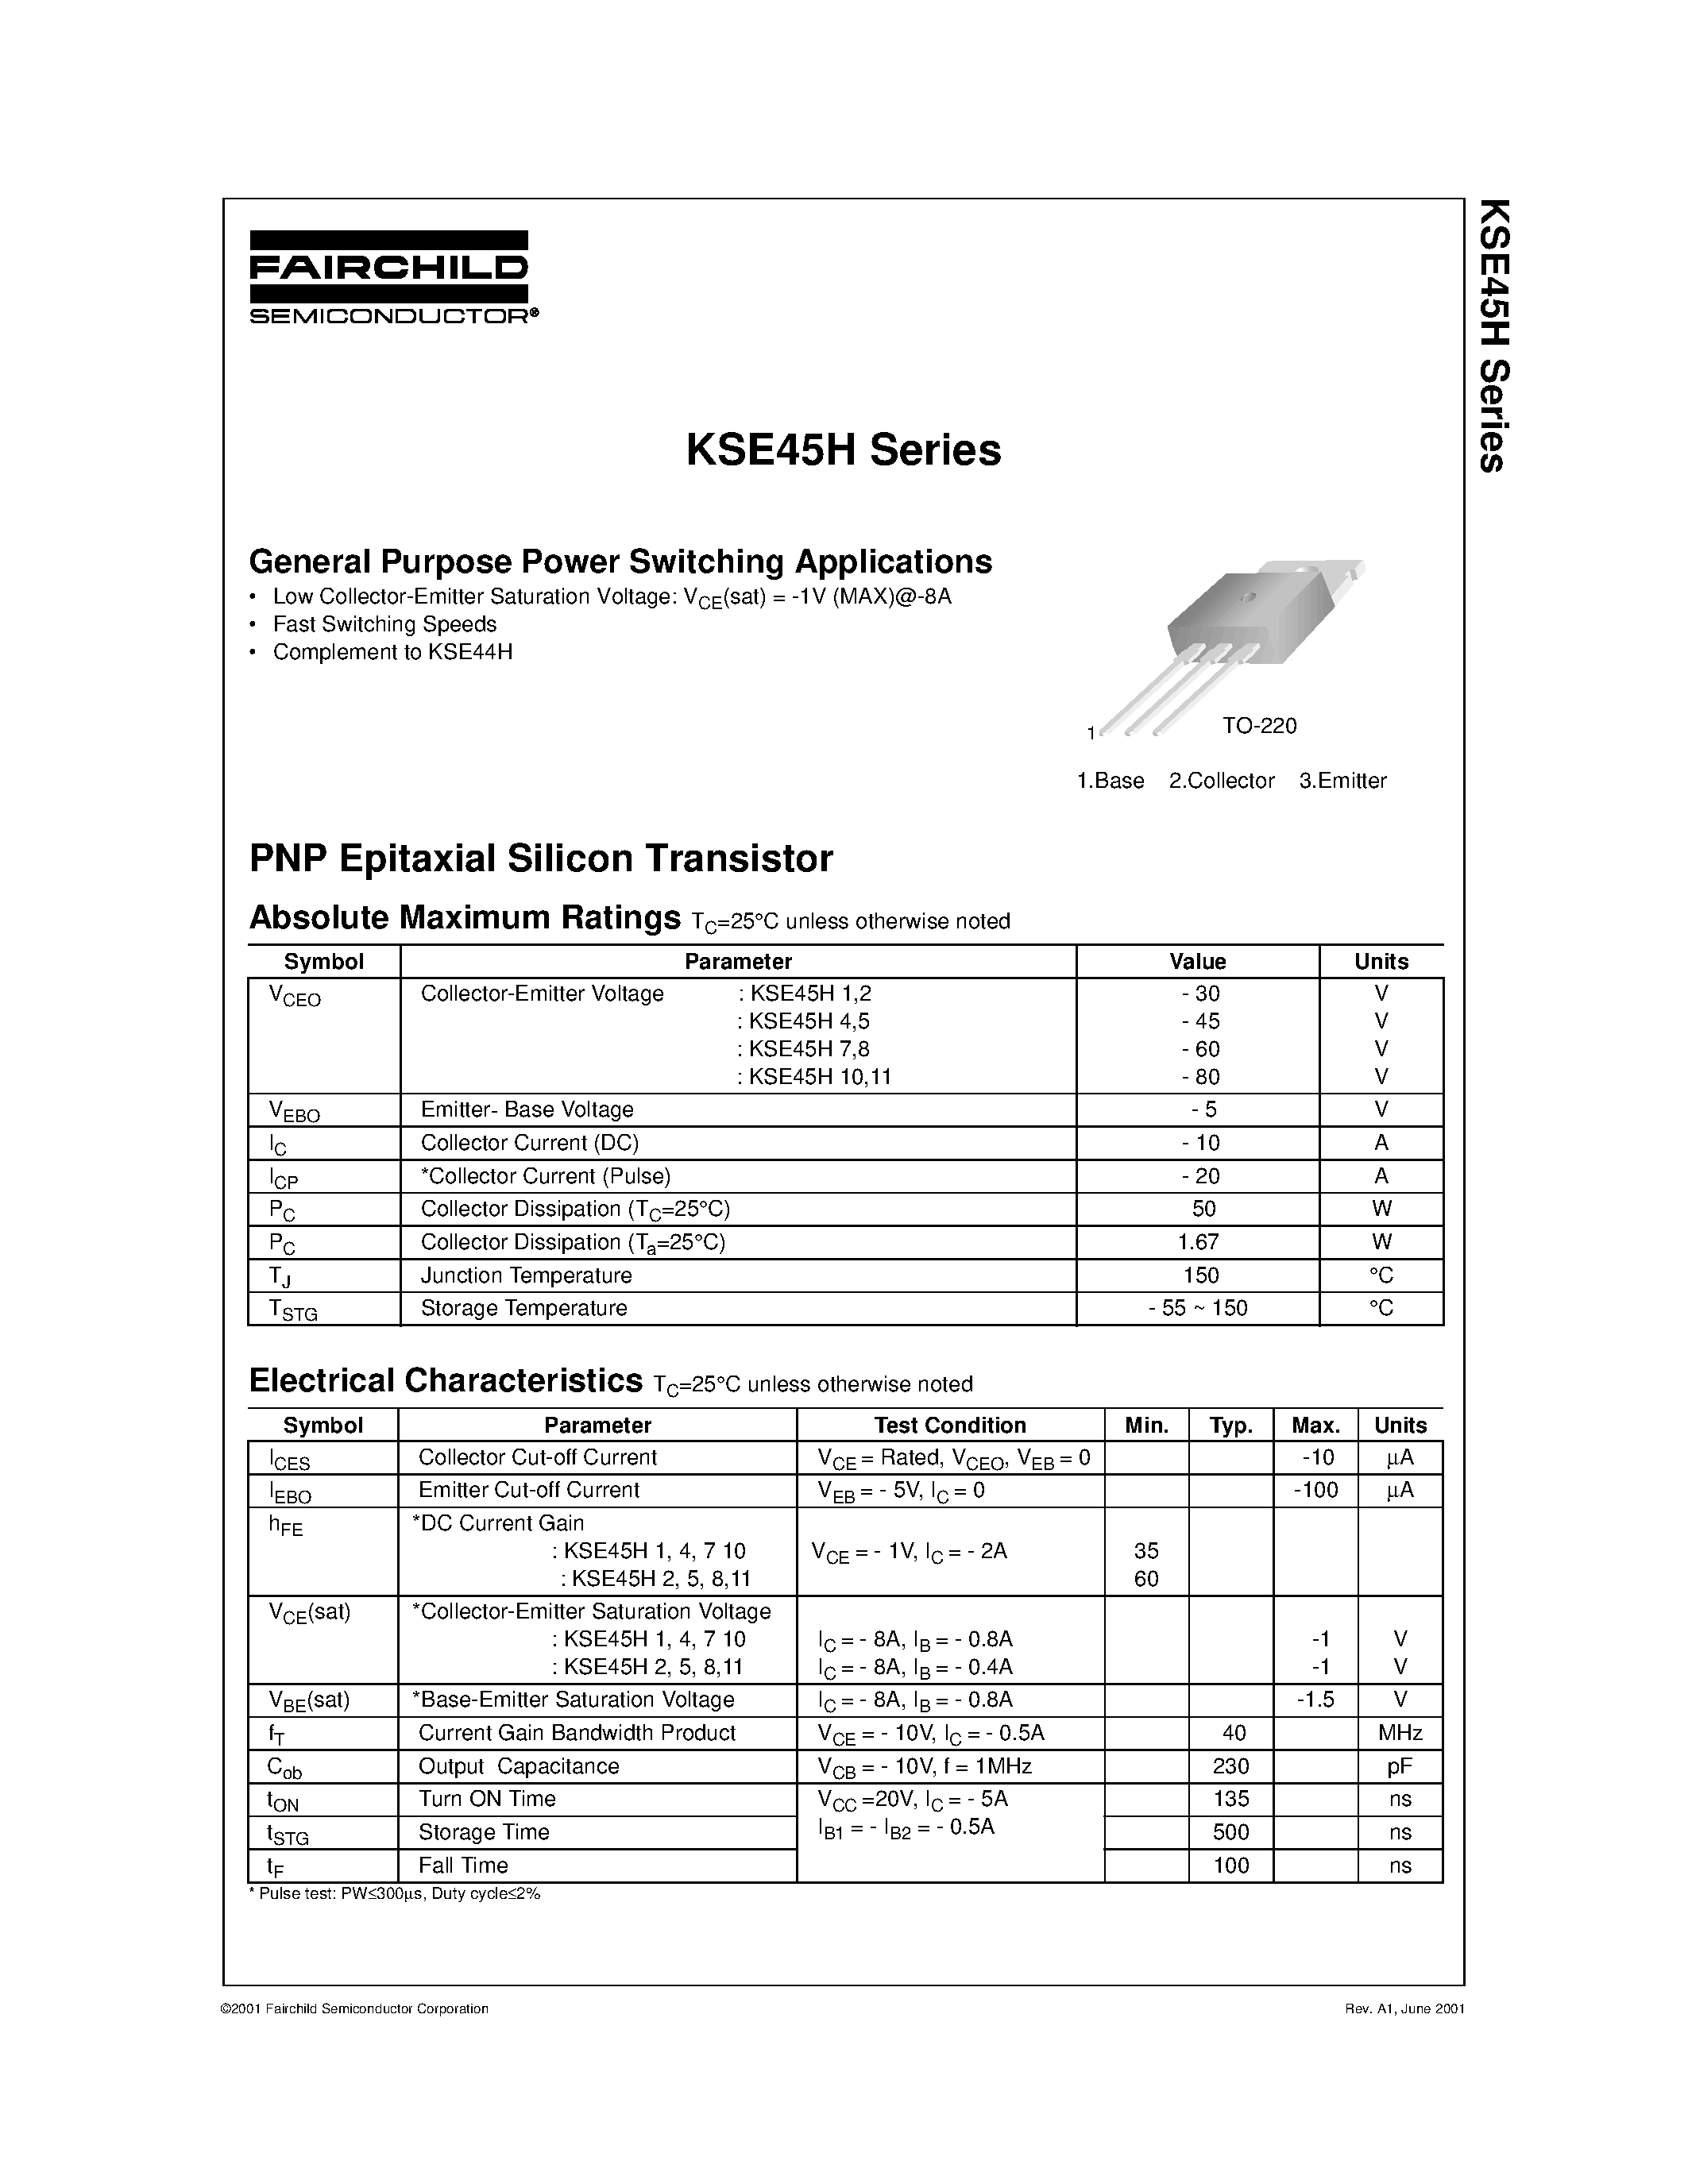 Даташит KSE45H10 - General Purpose Power Switching Applications страница 1